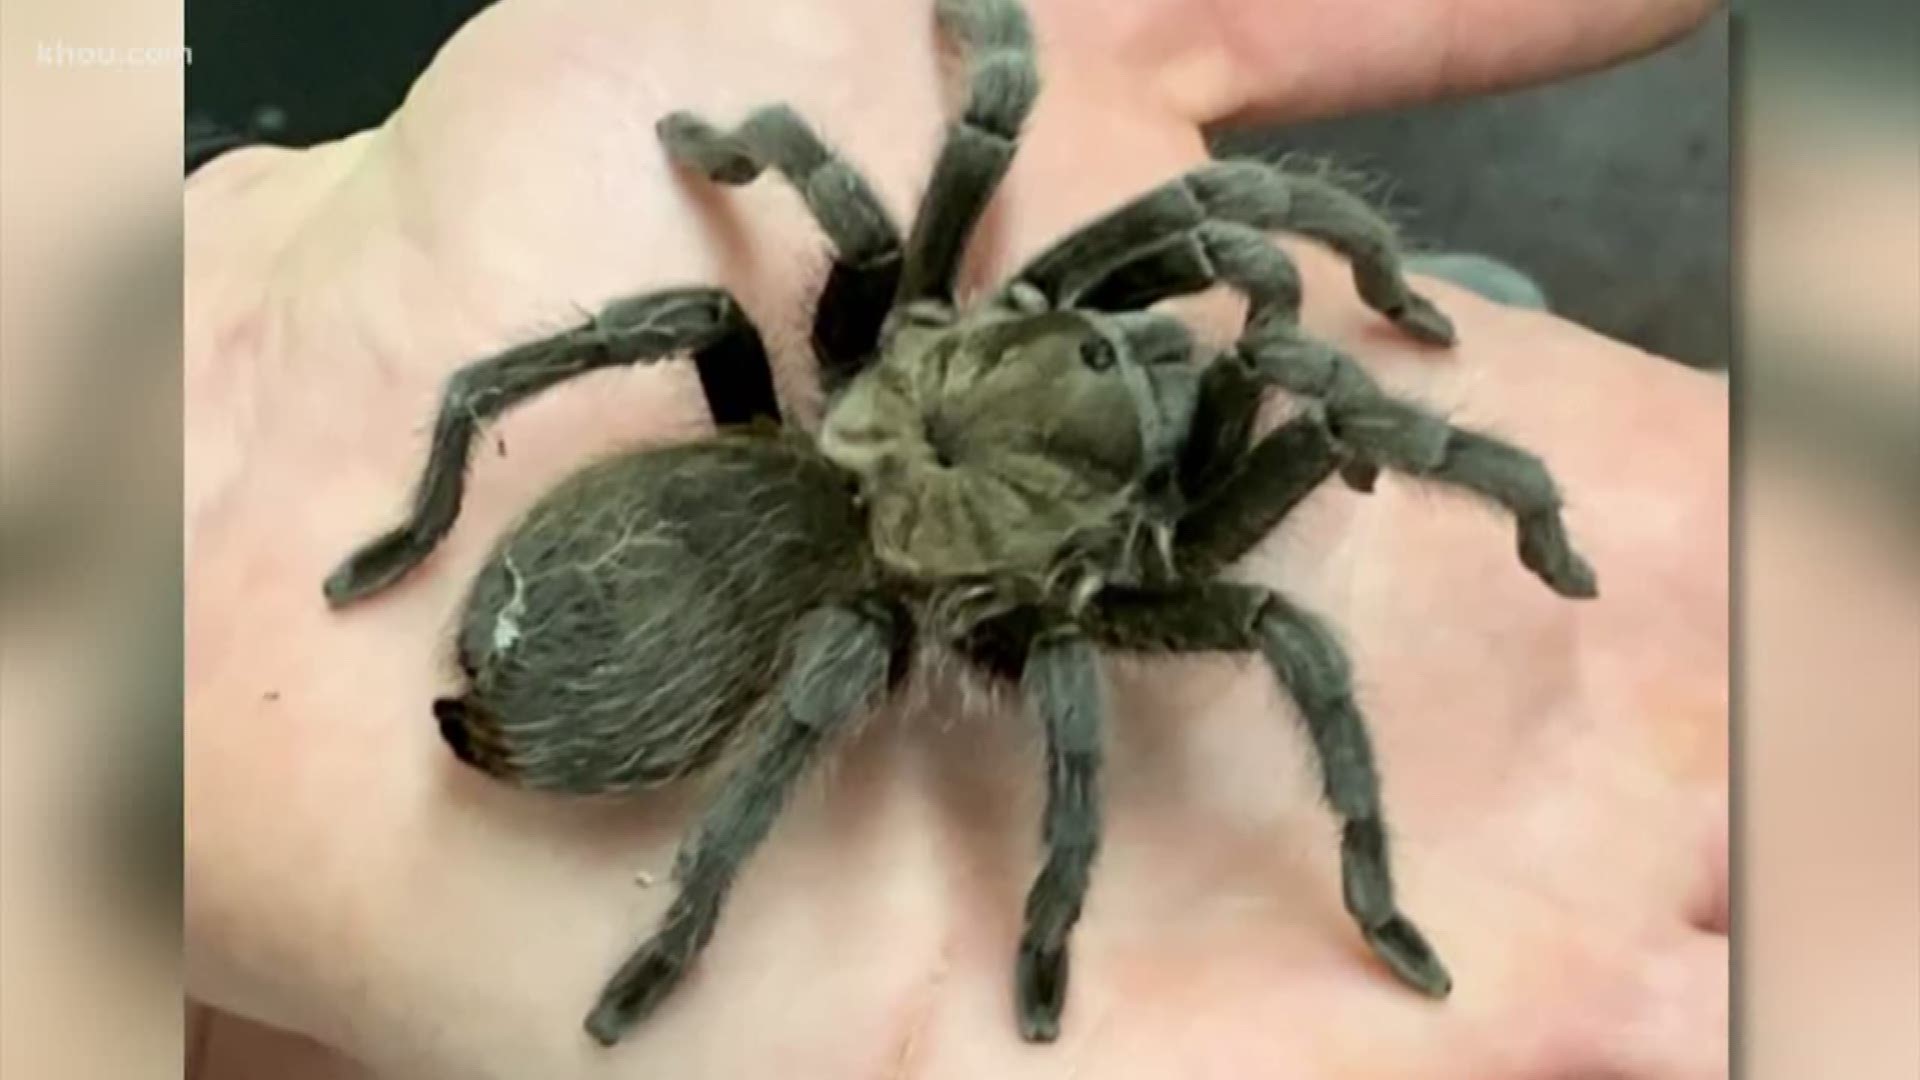 It’s once again that time of the year when the Texas brown tarantula makes an appearance in parts of North Texas. From late May to October they appear in places from the desert to grasslands throughout Texas. Things get spicy in August, when it's mating season. Then tarantulas retreat to their boroughs when the weather gets colder.